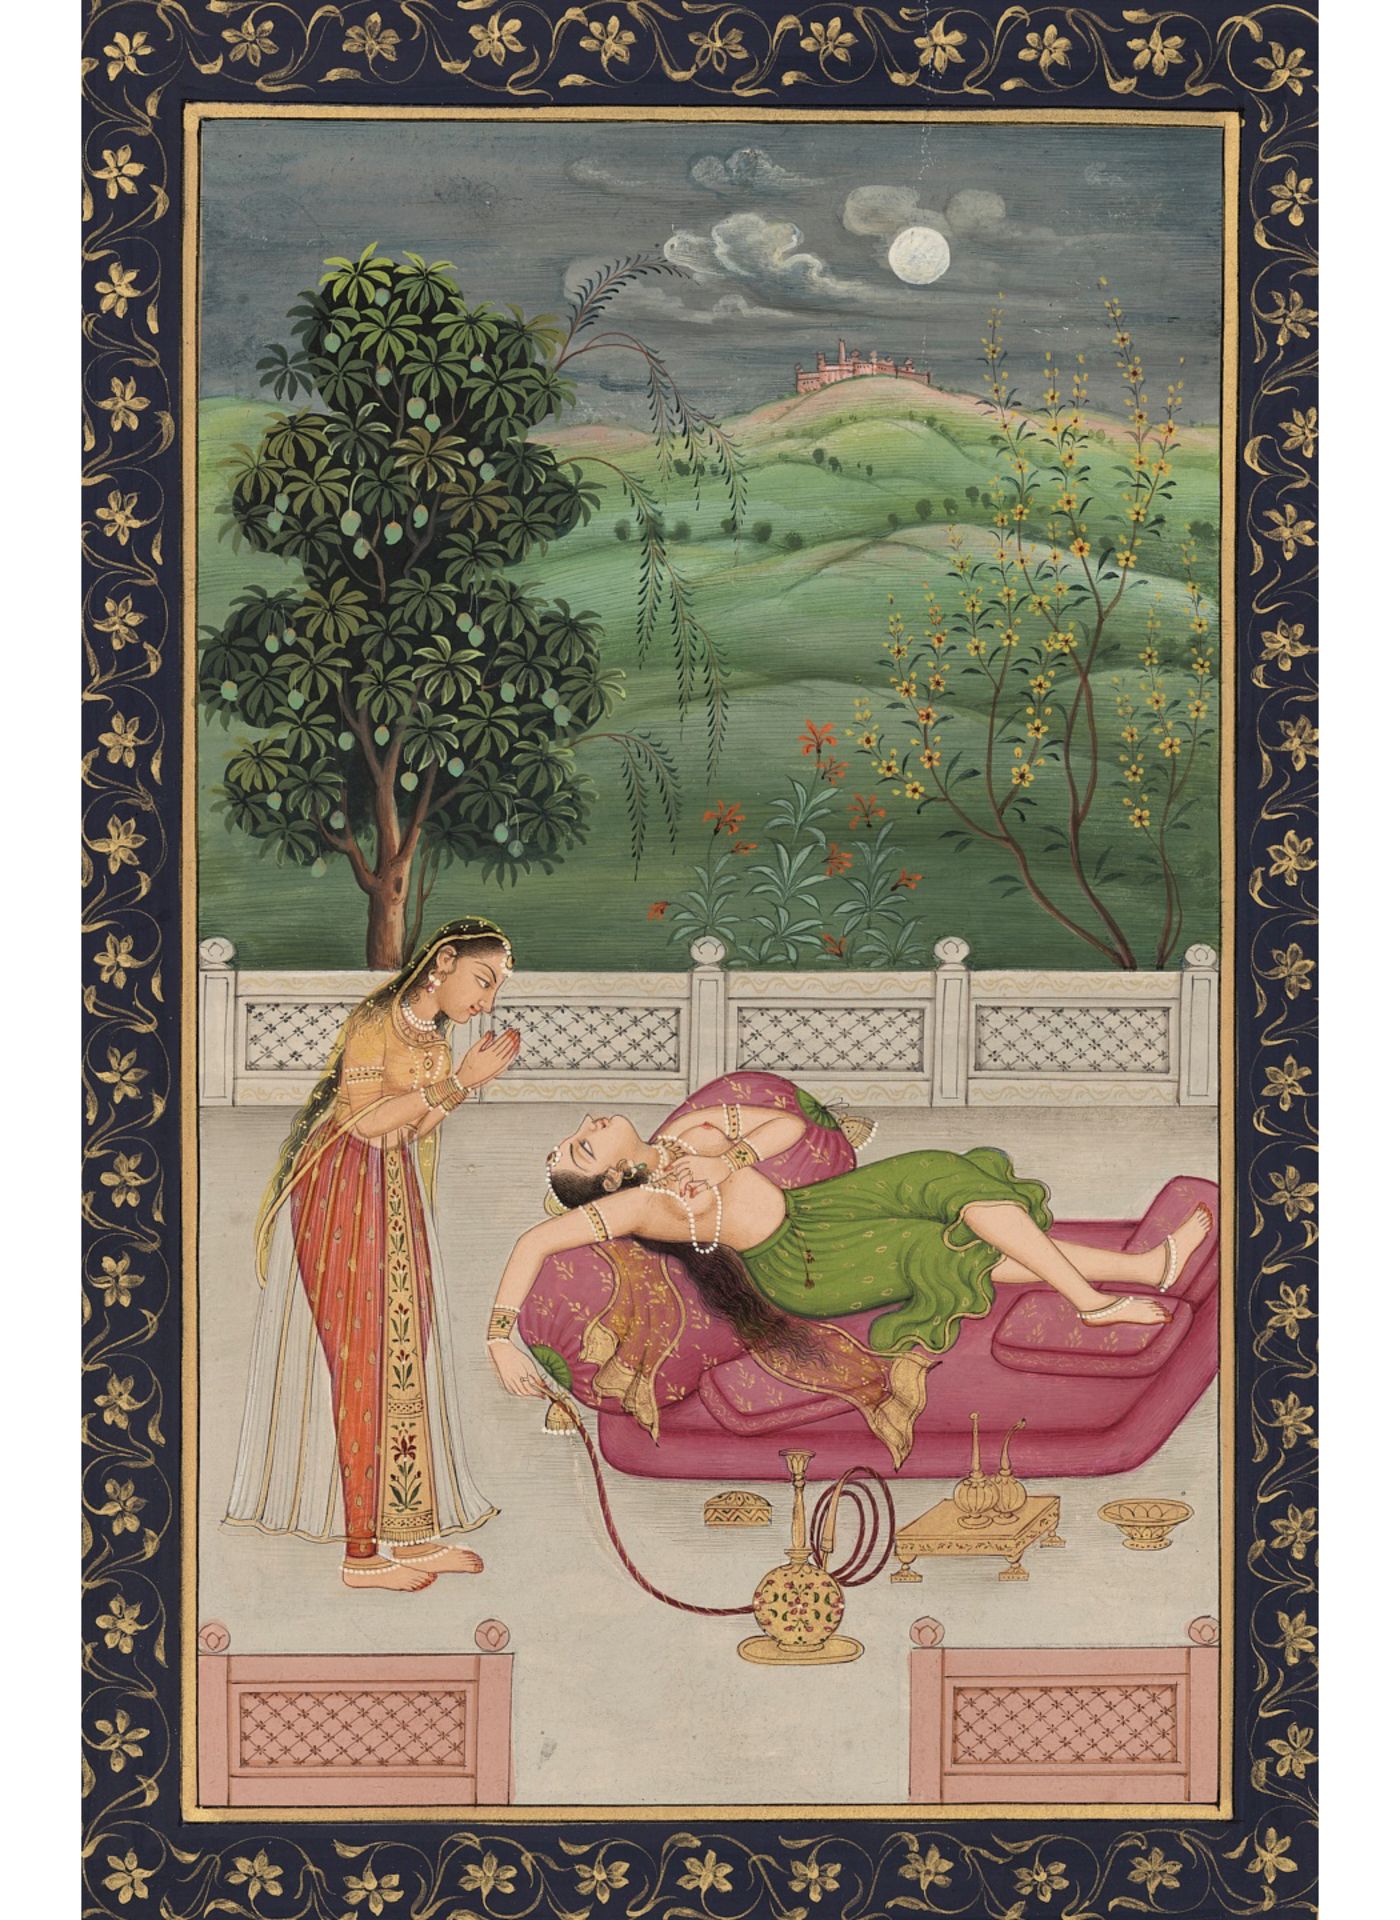 AN INDIAN MINIATURE PAINTING OF A LADY SMOKING A HOOKAH - Image 2 of 8